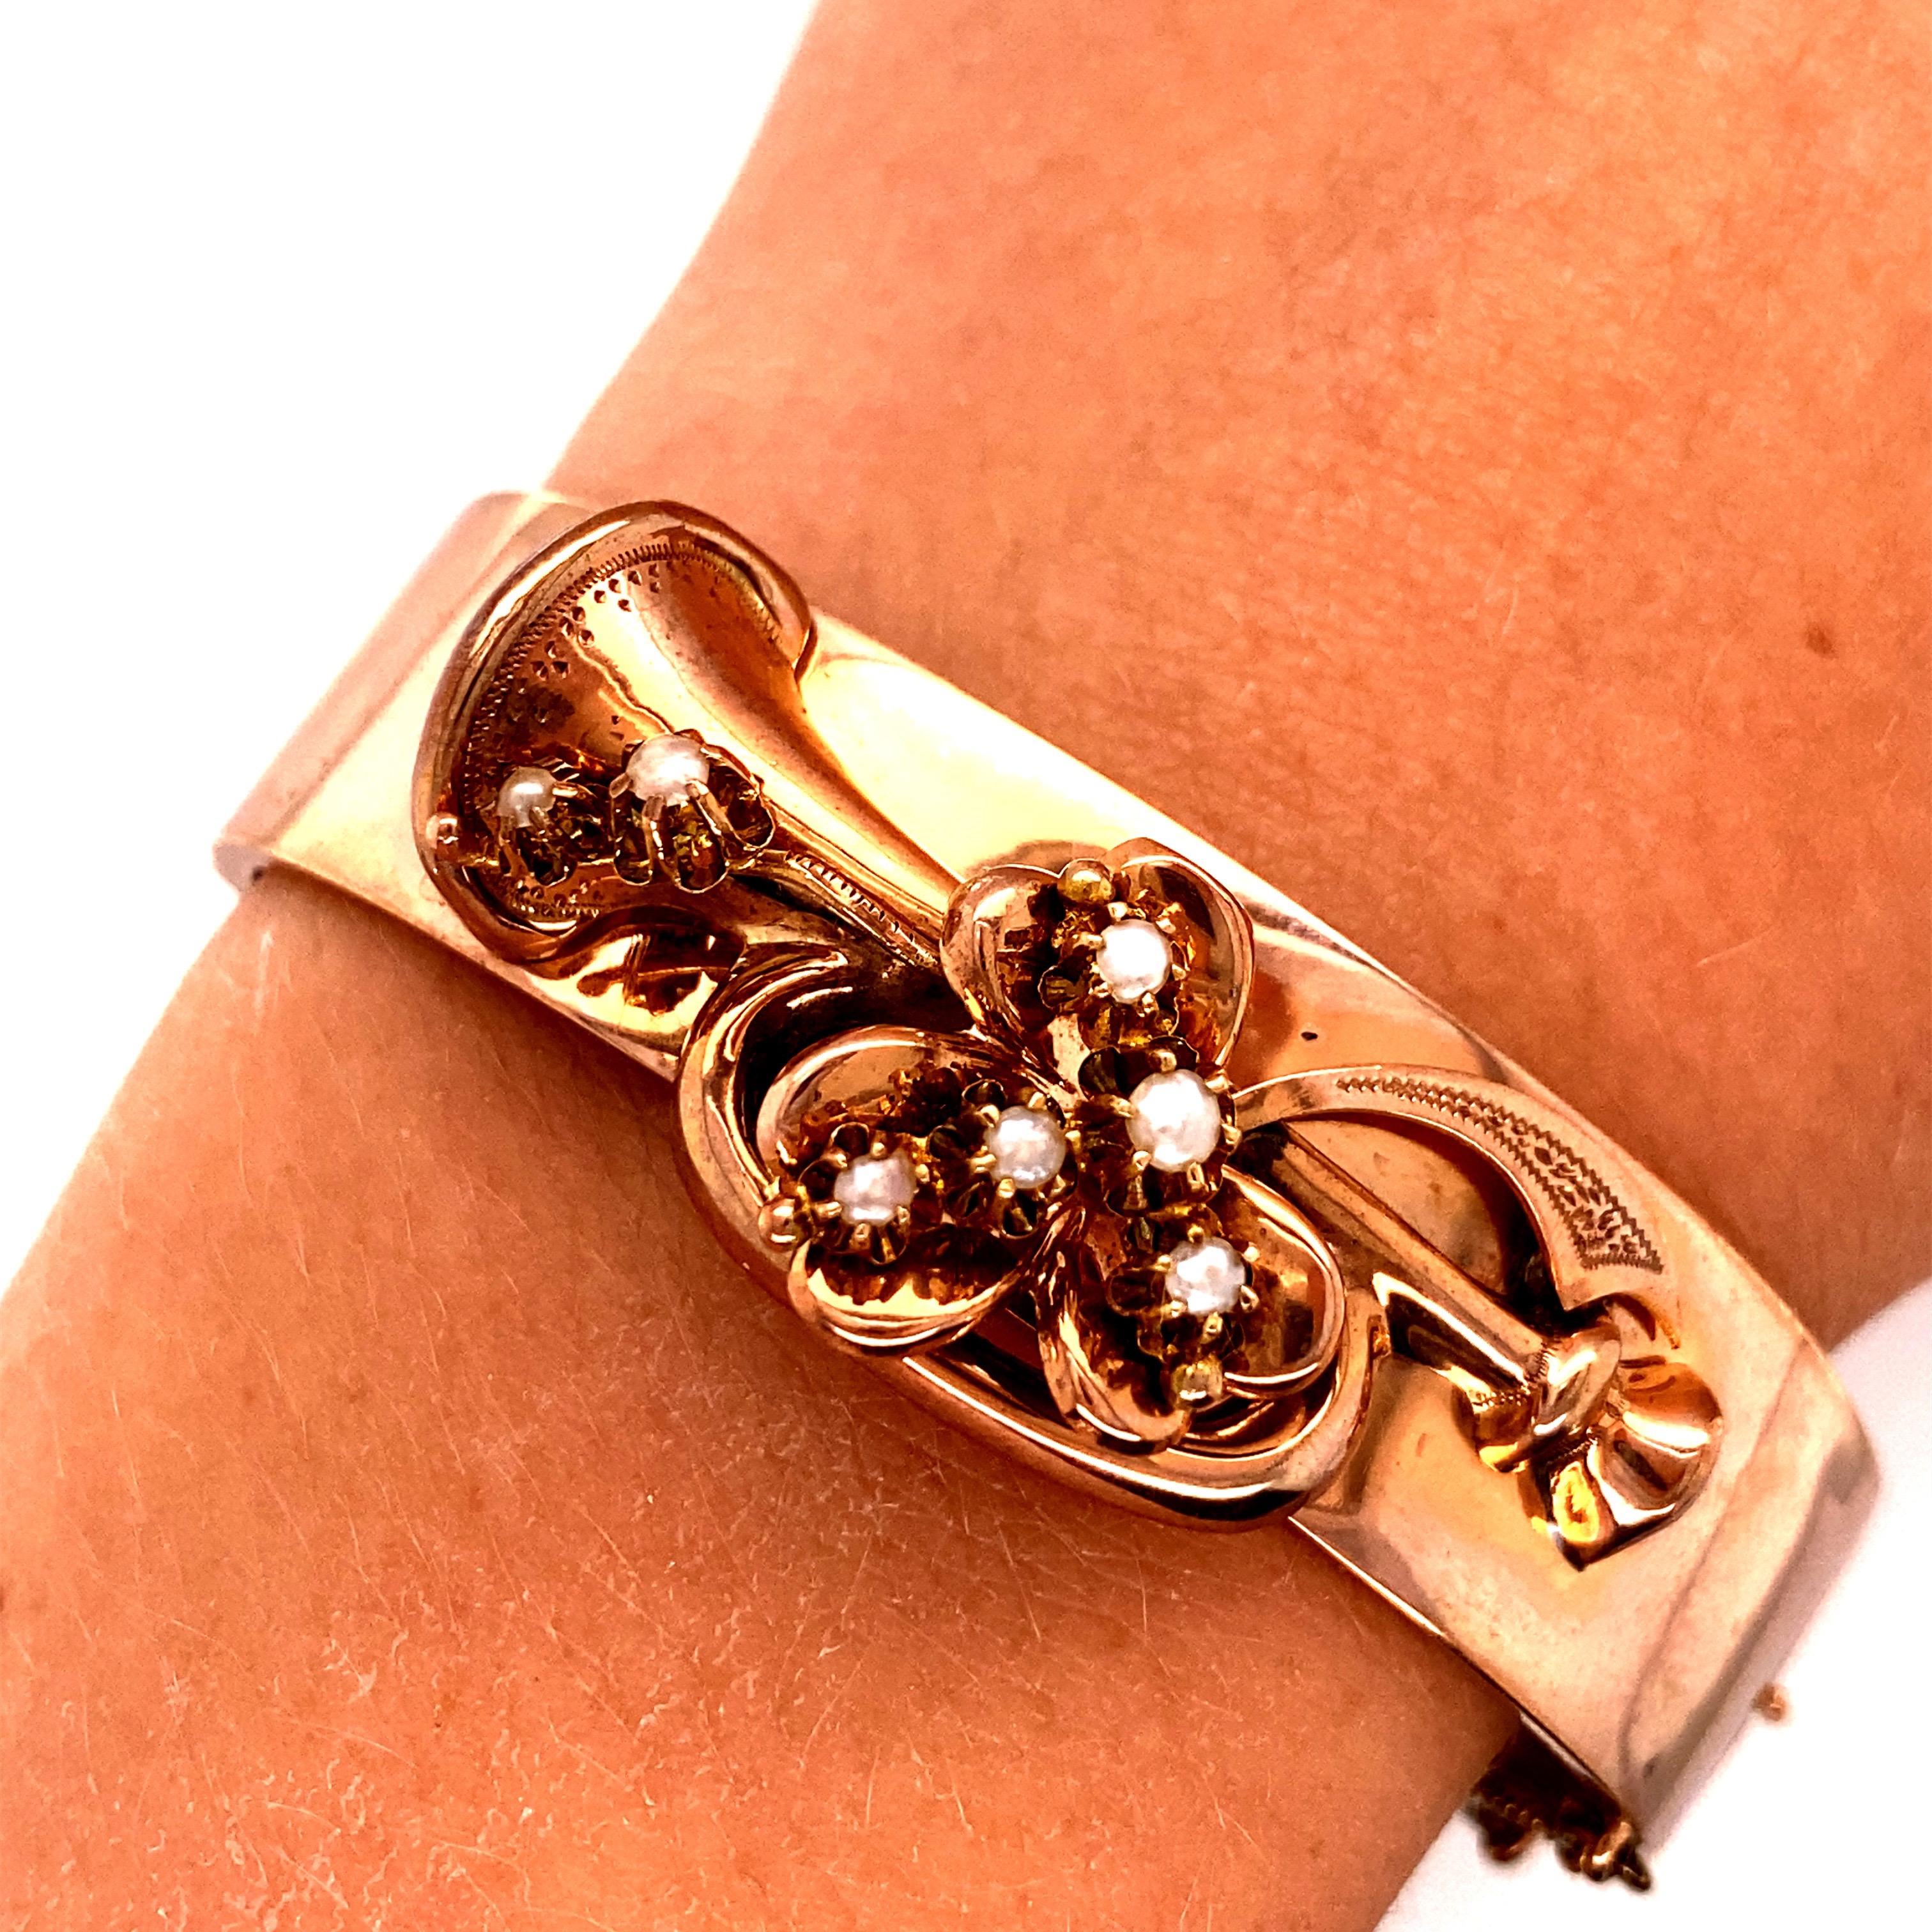 Vintage 1940's 14K Rose Gold Retro Bangle Bracelet with Trumpet Design In Good Condition For Sale In Boston, MA